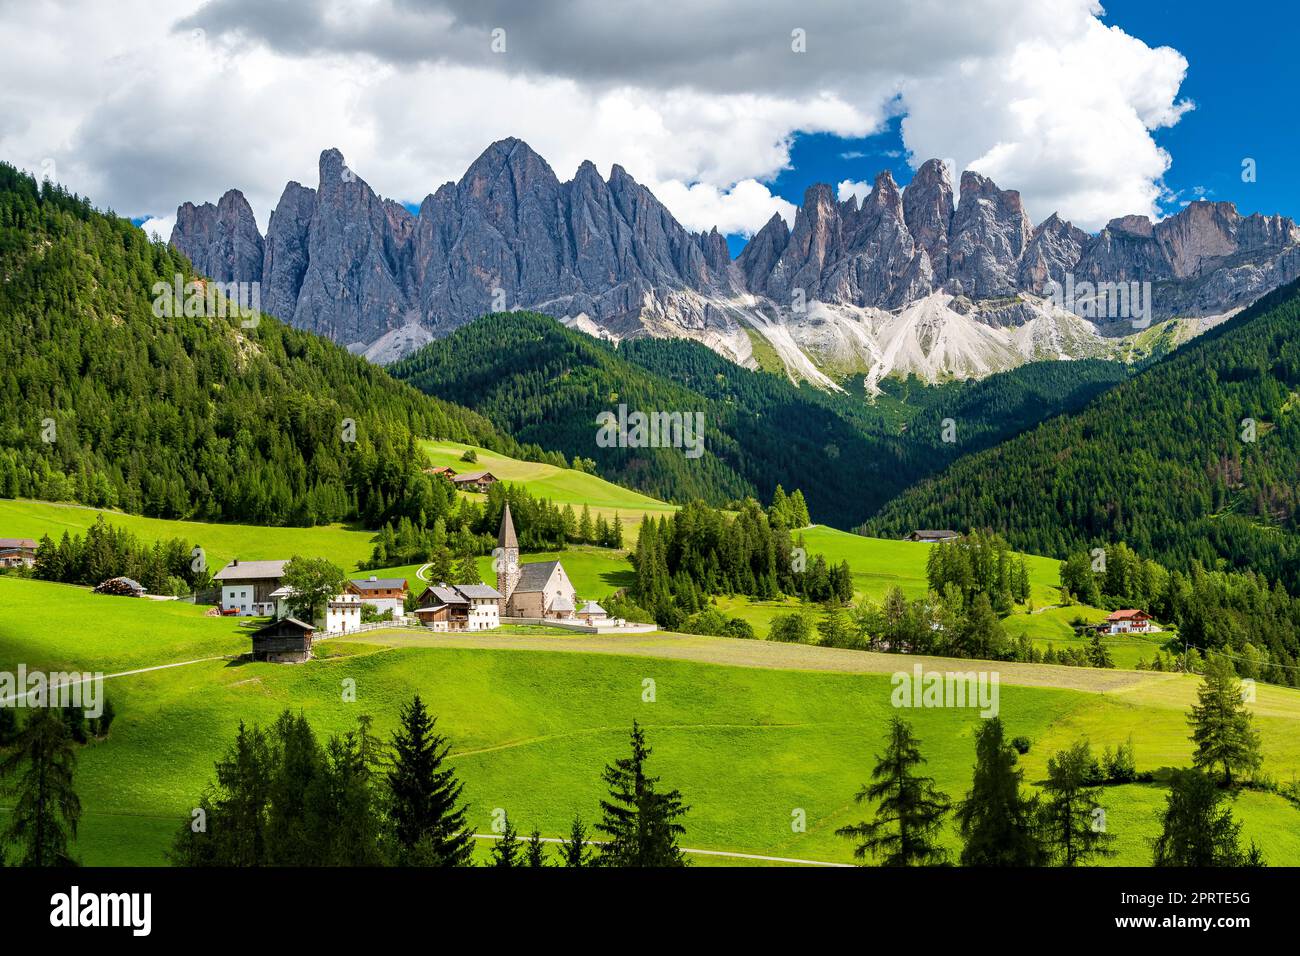 Saint Magdalena church of Villnöß (Funes) in South Tyrol in northern Italy with the iconic Gruppo delle Odle mountains of the Dolomite Alps Stock Photo